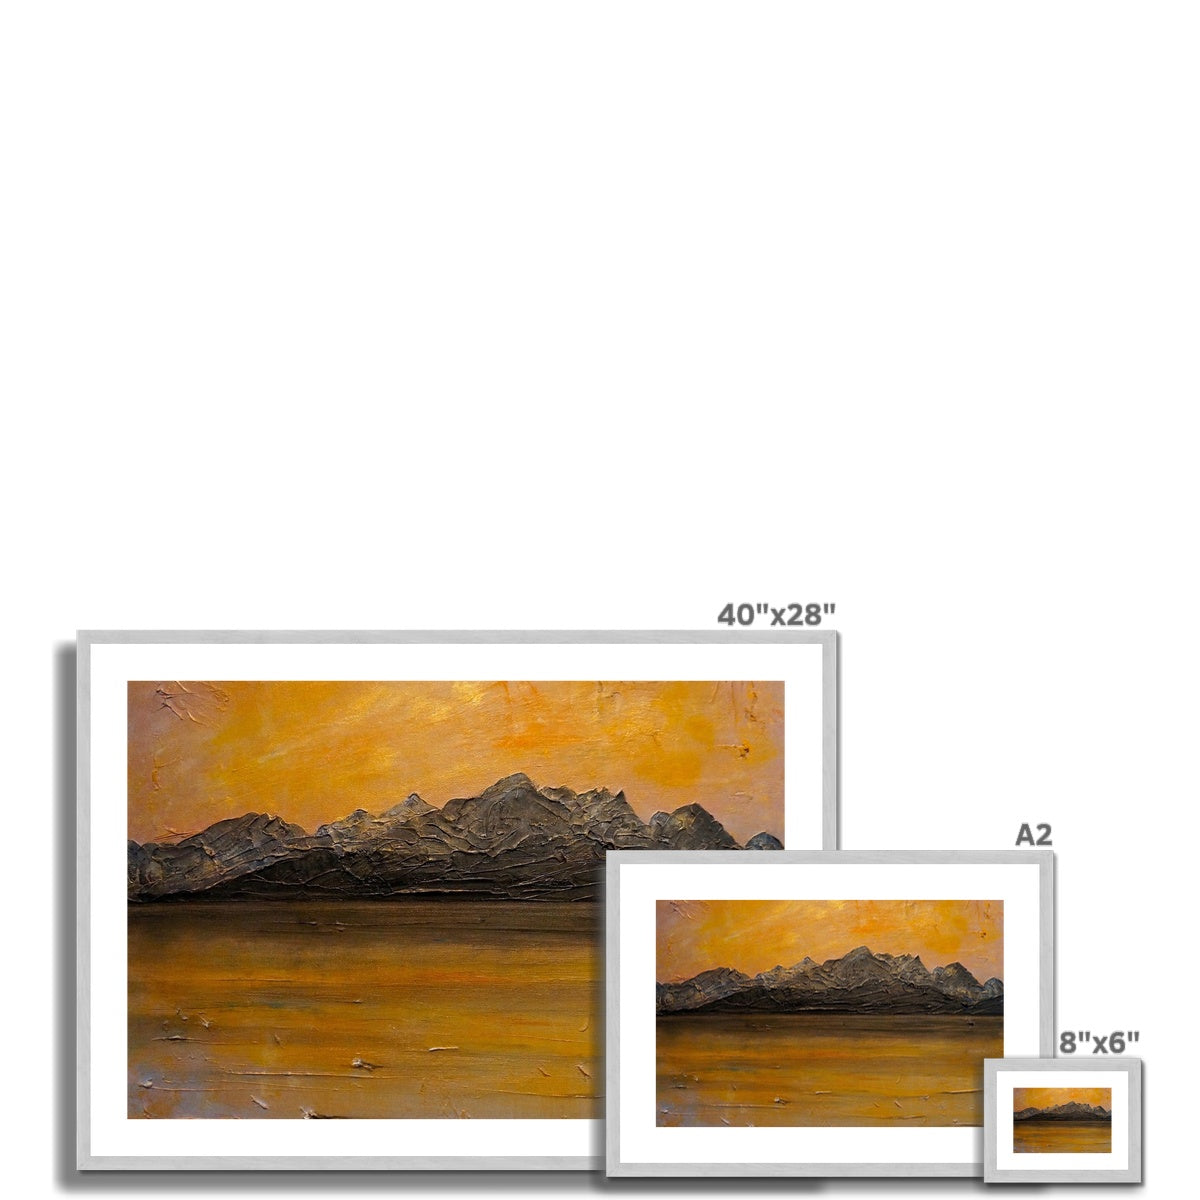 Cuillin Sunset Skye Painting | Antique Framed & Mounted Prints From Scotland-Antique Framed & Mounted Prints-Skye Art Gallery-Paintings, Prints, Homeware, Art Gifts From Scotland By Scottish Artist Kevin Hunter